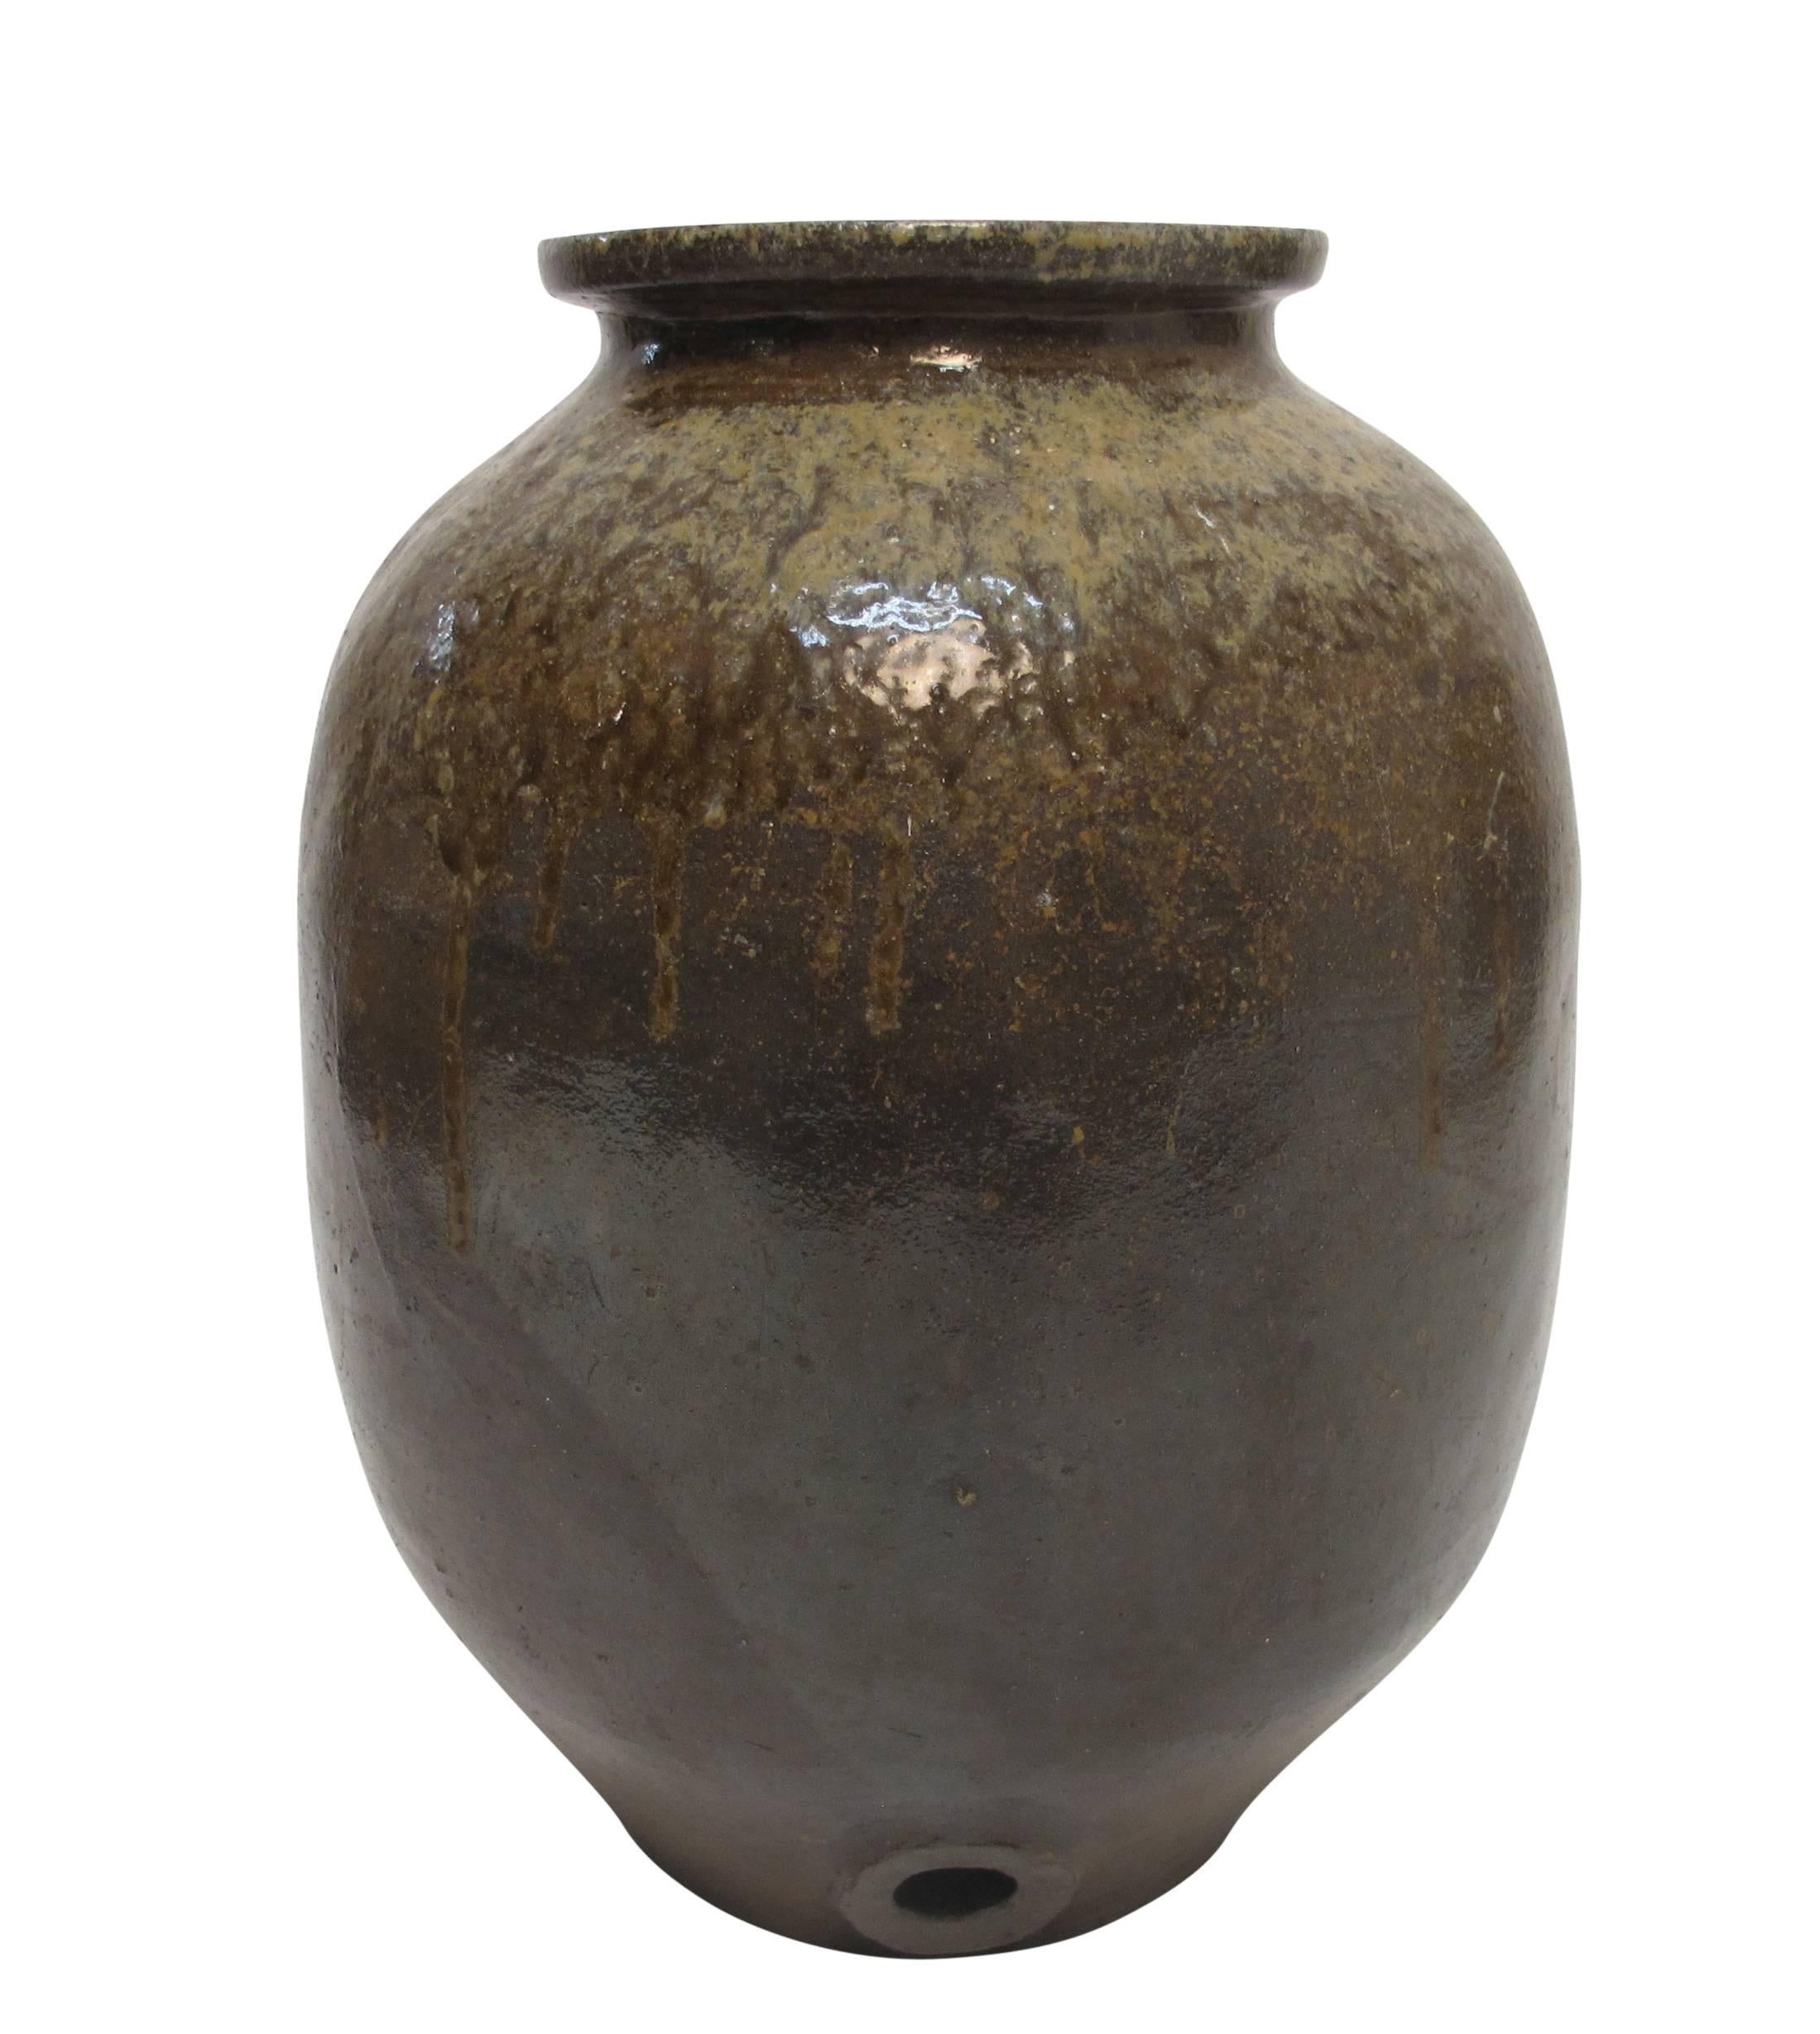 A large heavily glazed stoneware sake jar or pot. Wonderful colors and shape. Presumedly the hole on the side would have had some kind of spout originally, Japan, 19th century.